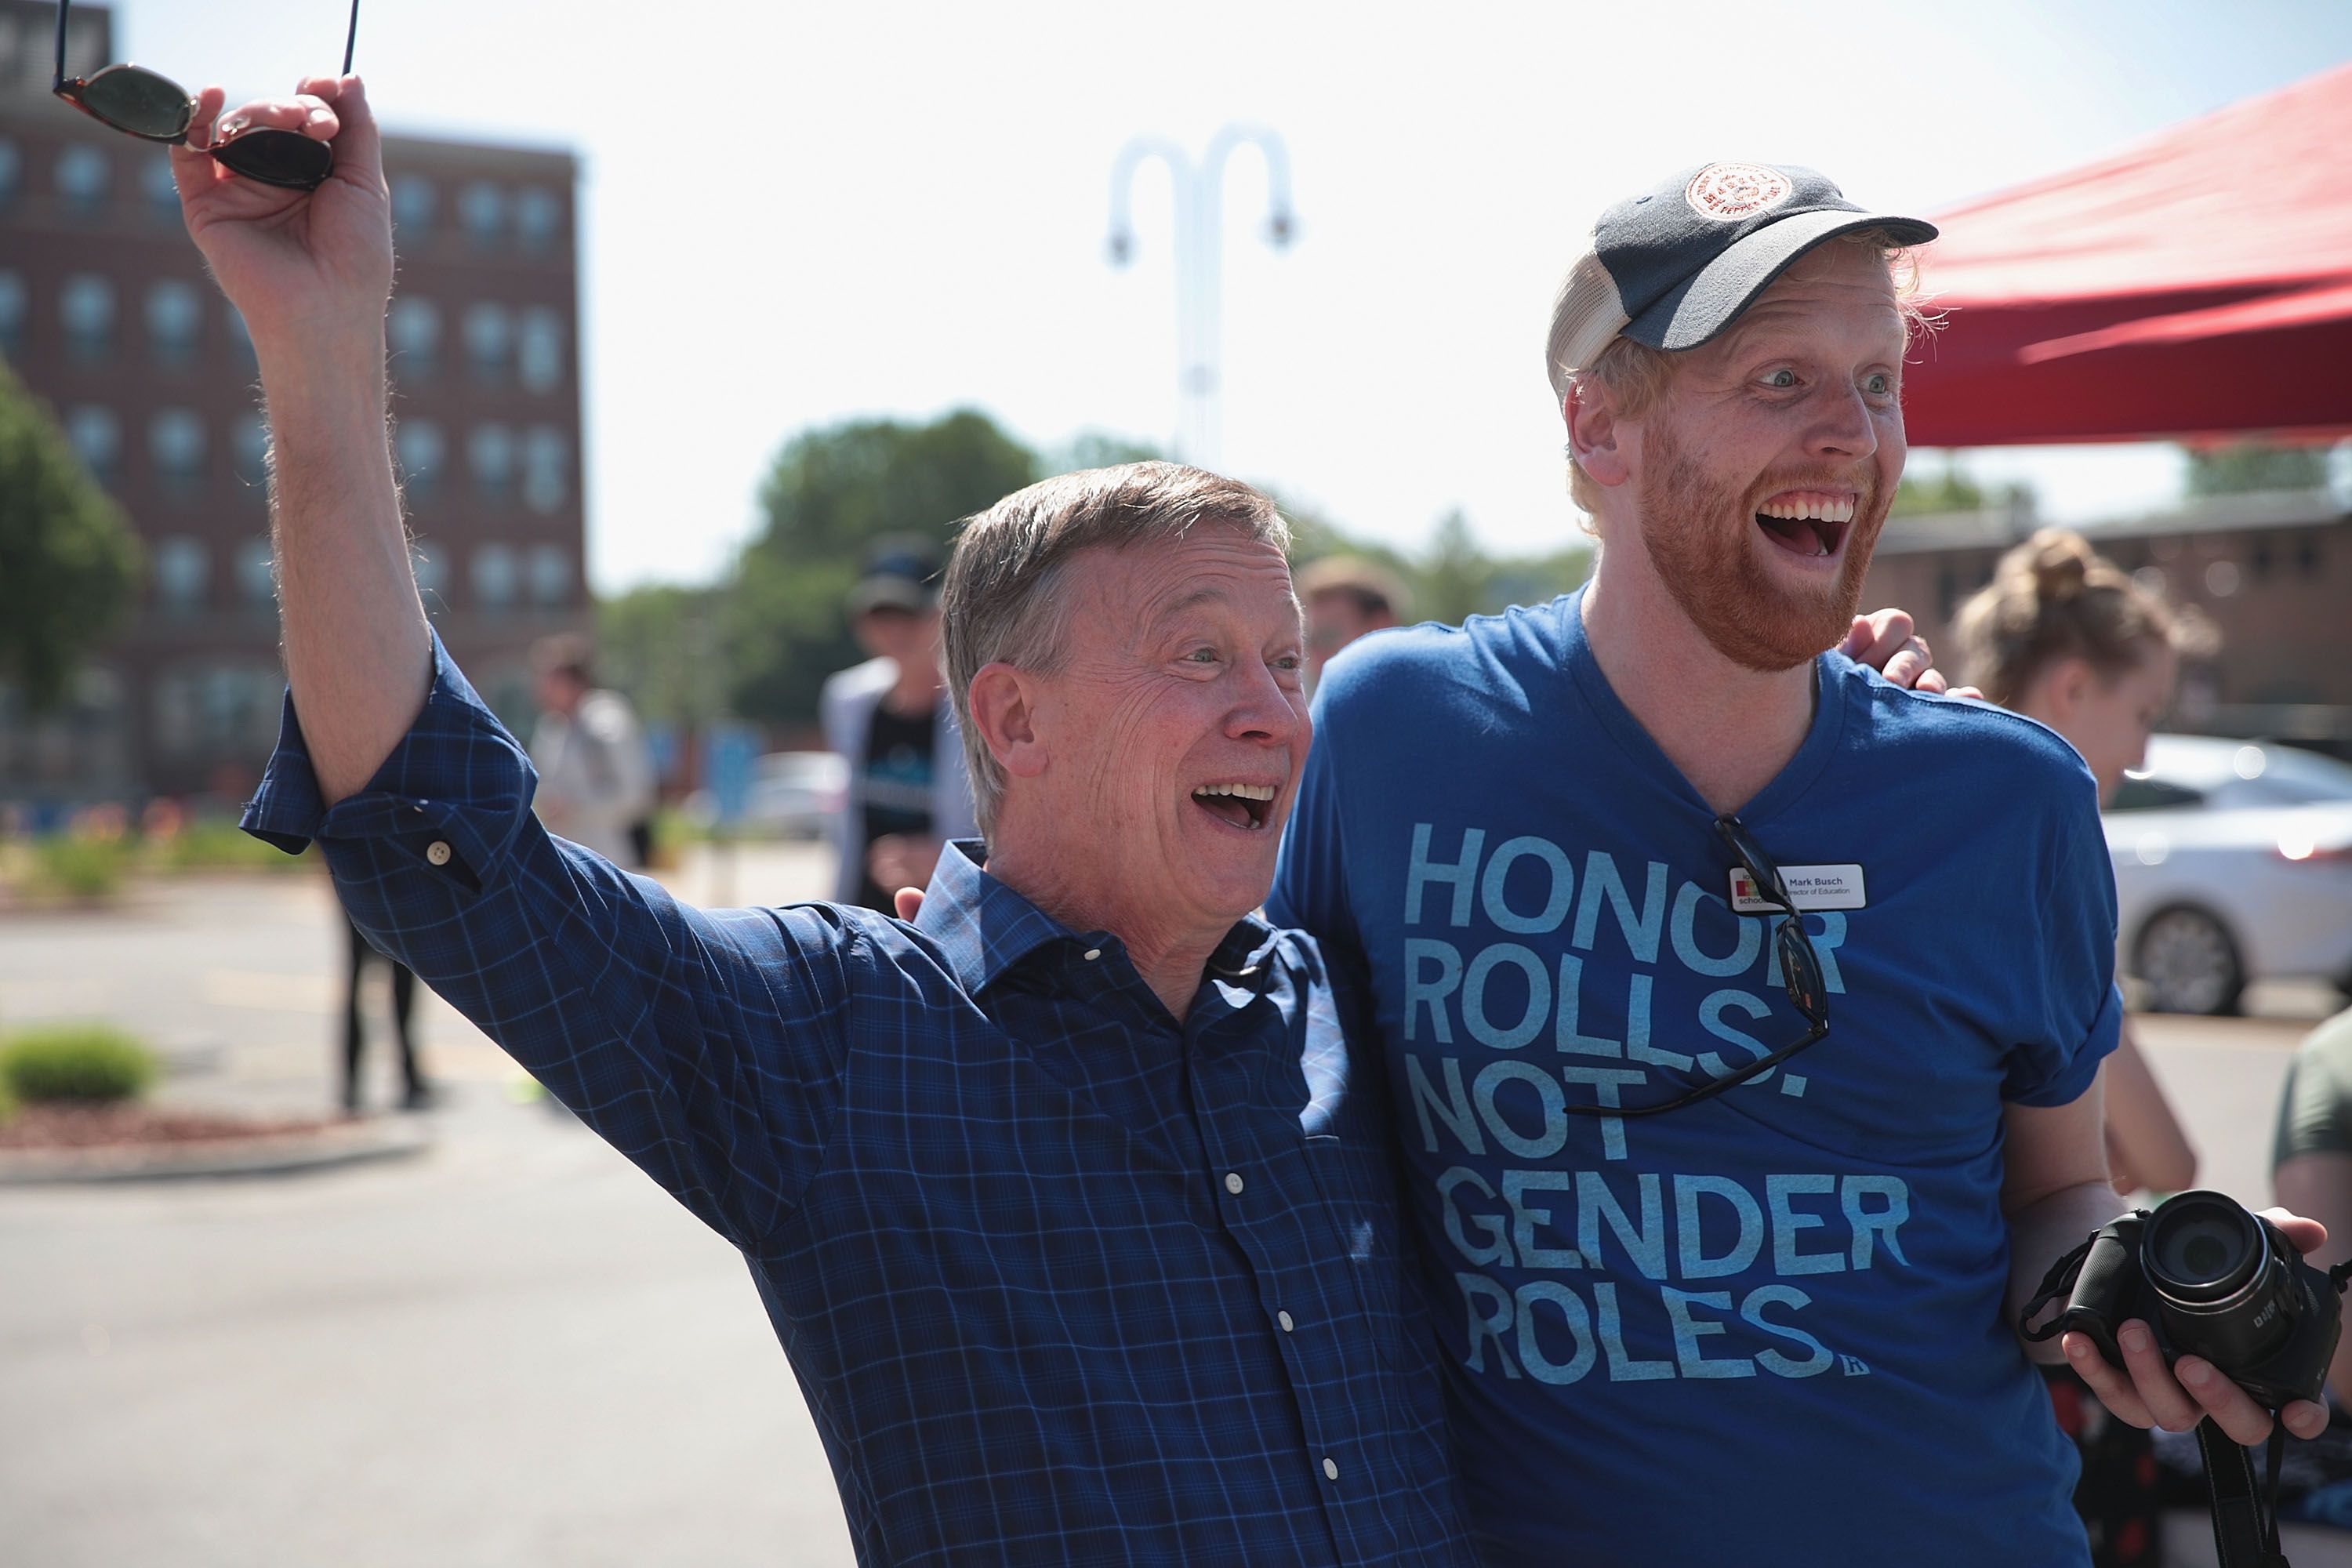 Democratic presidential candidate and former Colorado governor John Hickenlooper greets people while campaigning at the Capital City Pride Fest on June 08, 2019 in Des Moines, Iowa. 